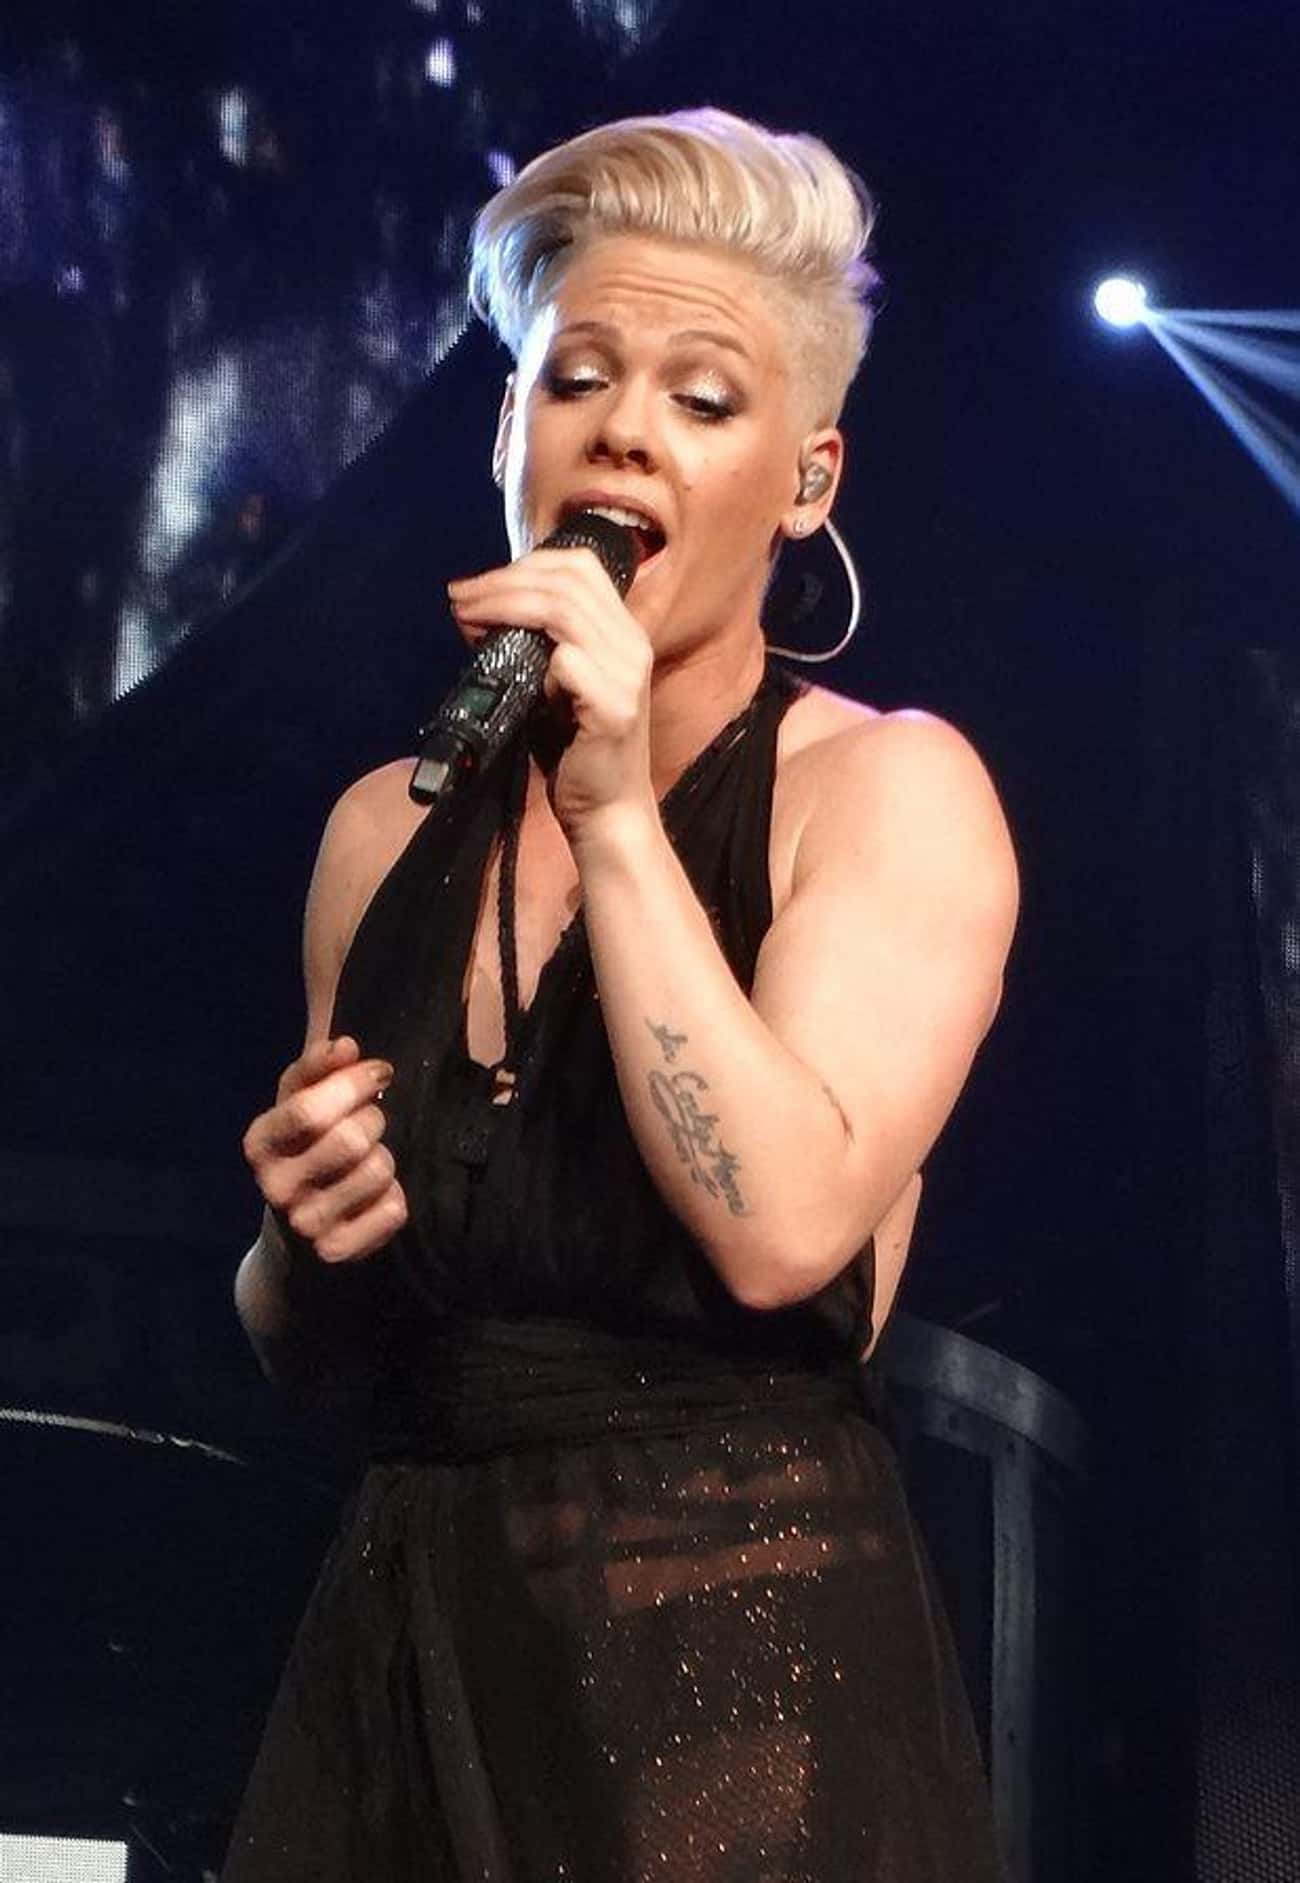 P!nk Requires A Nipple Pincher To Get Her Amped For Performances